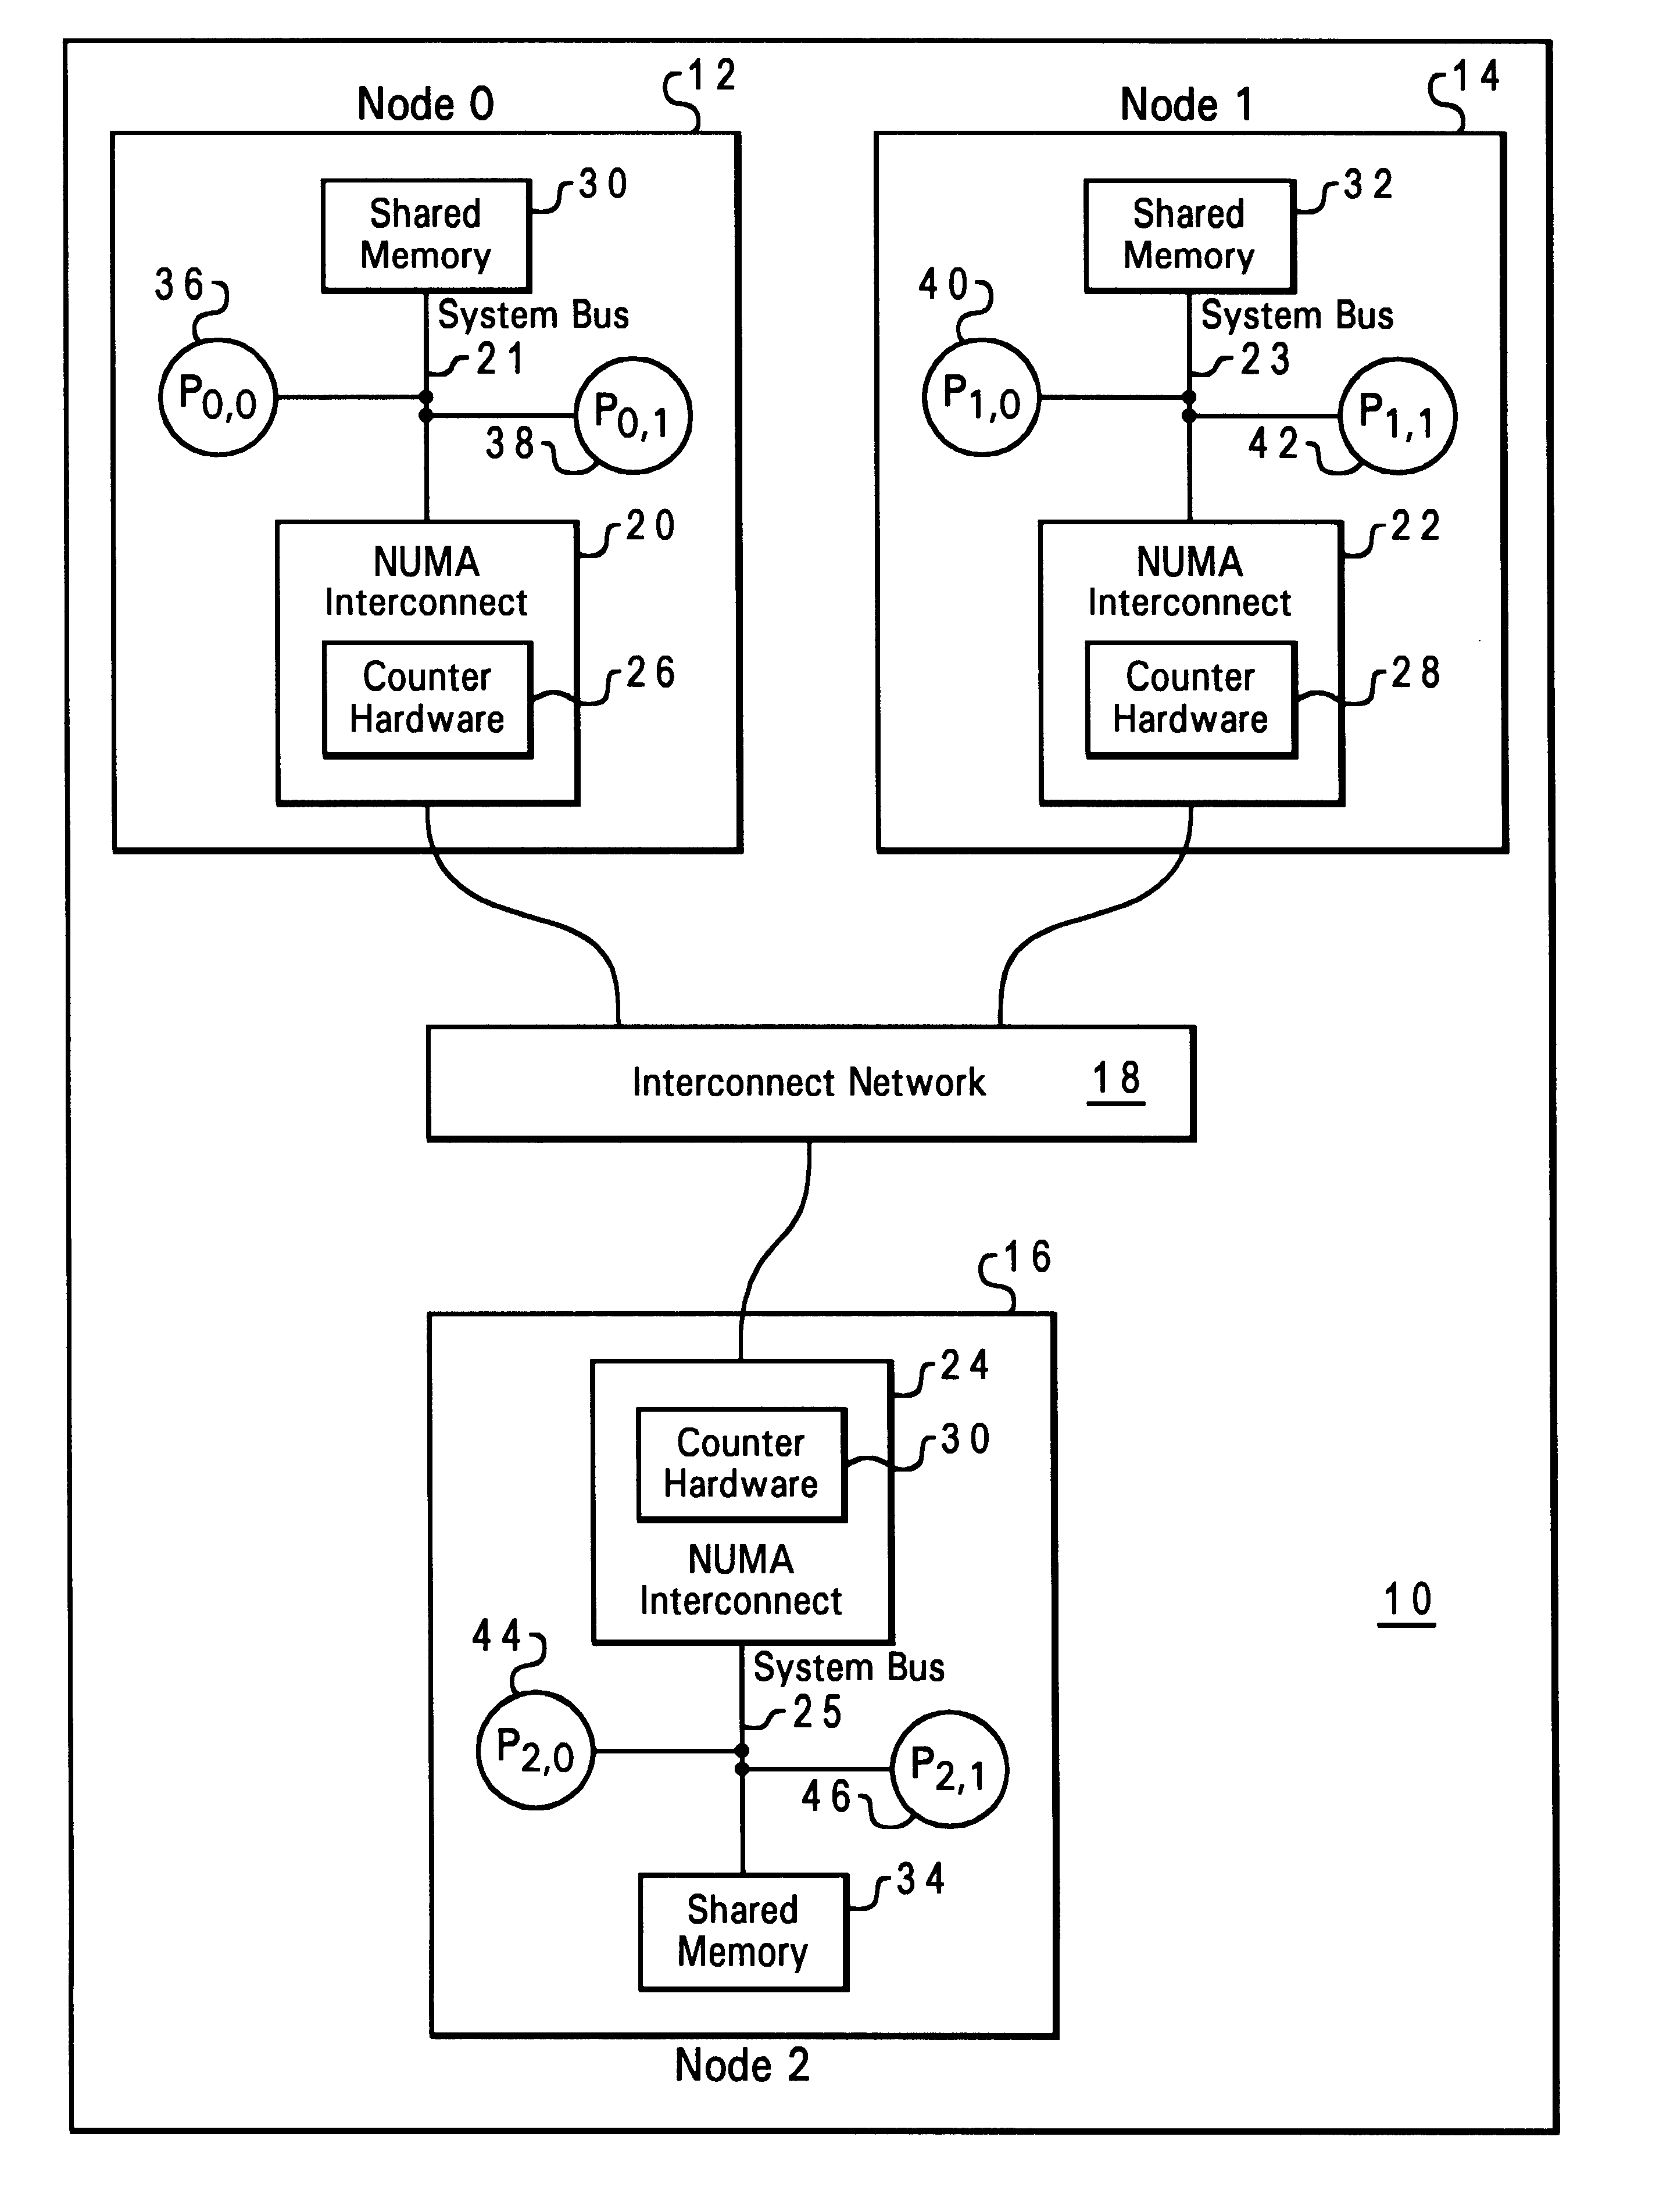 Method and system in a distributed shared-memory data processing system for determining utilization of nodes by each executed thread